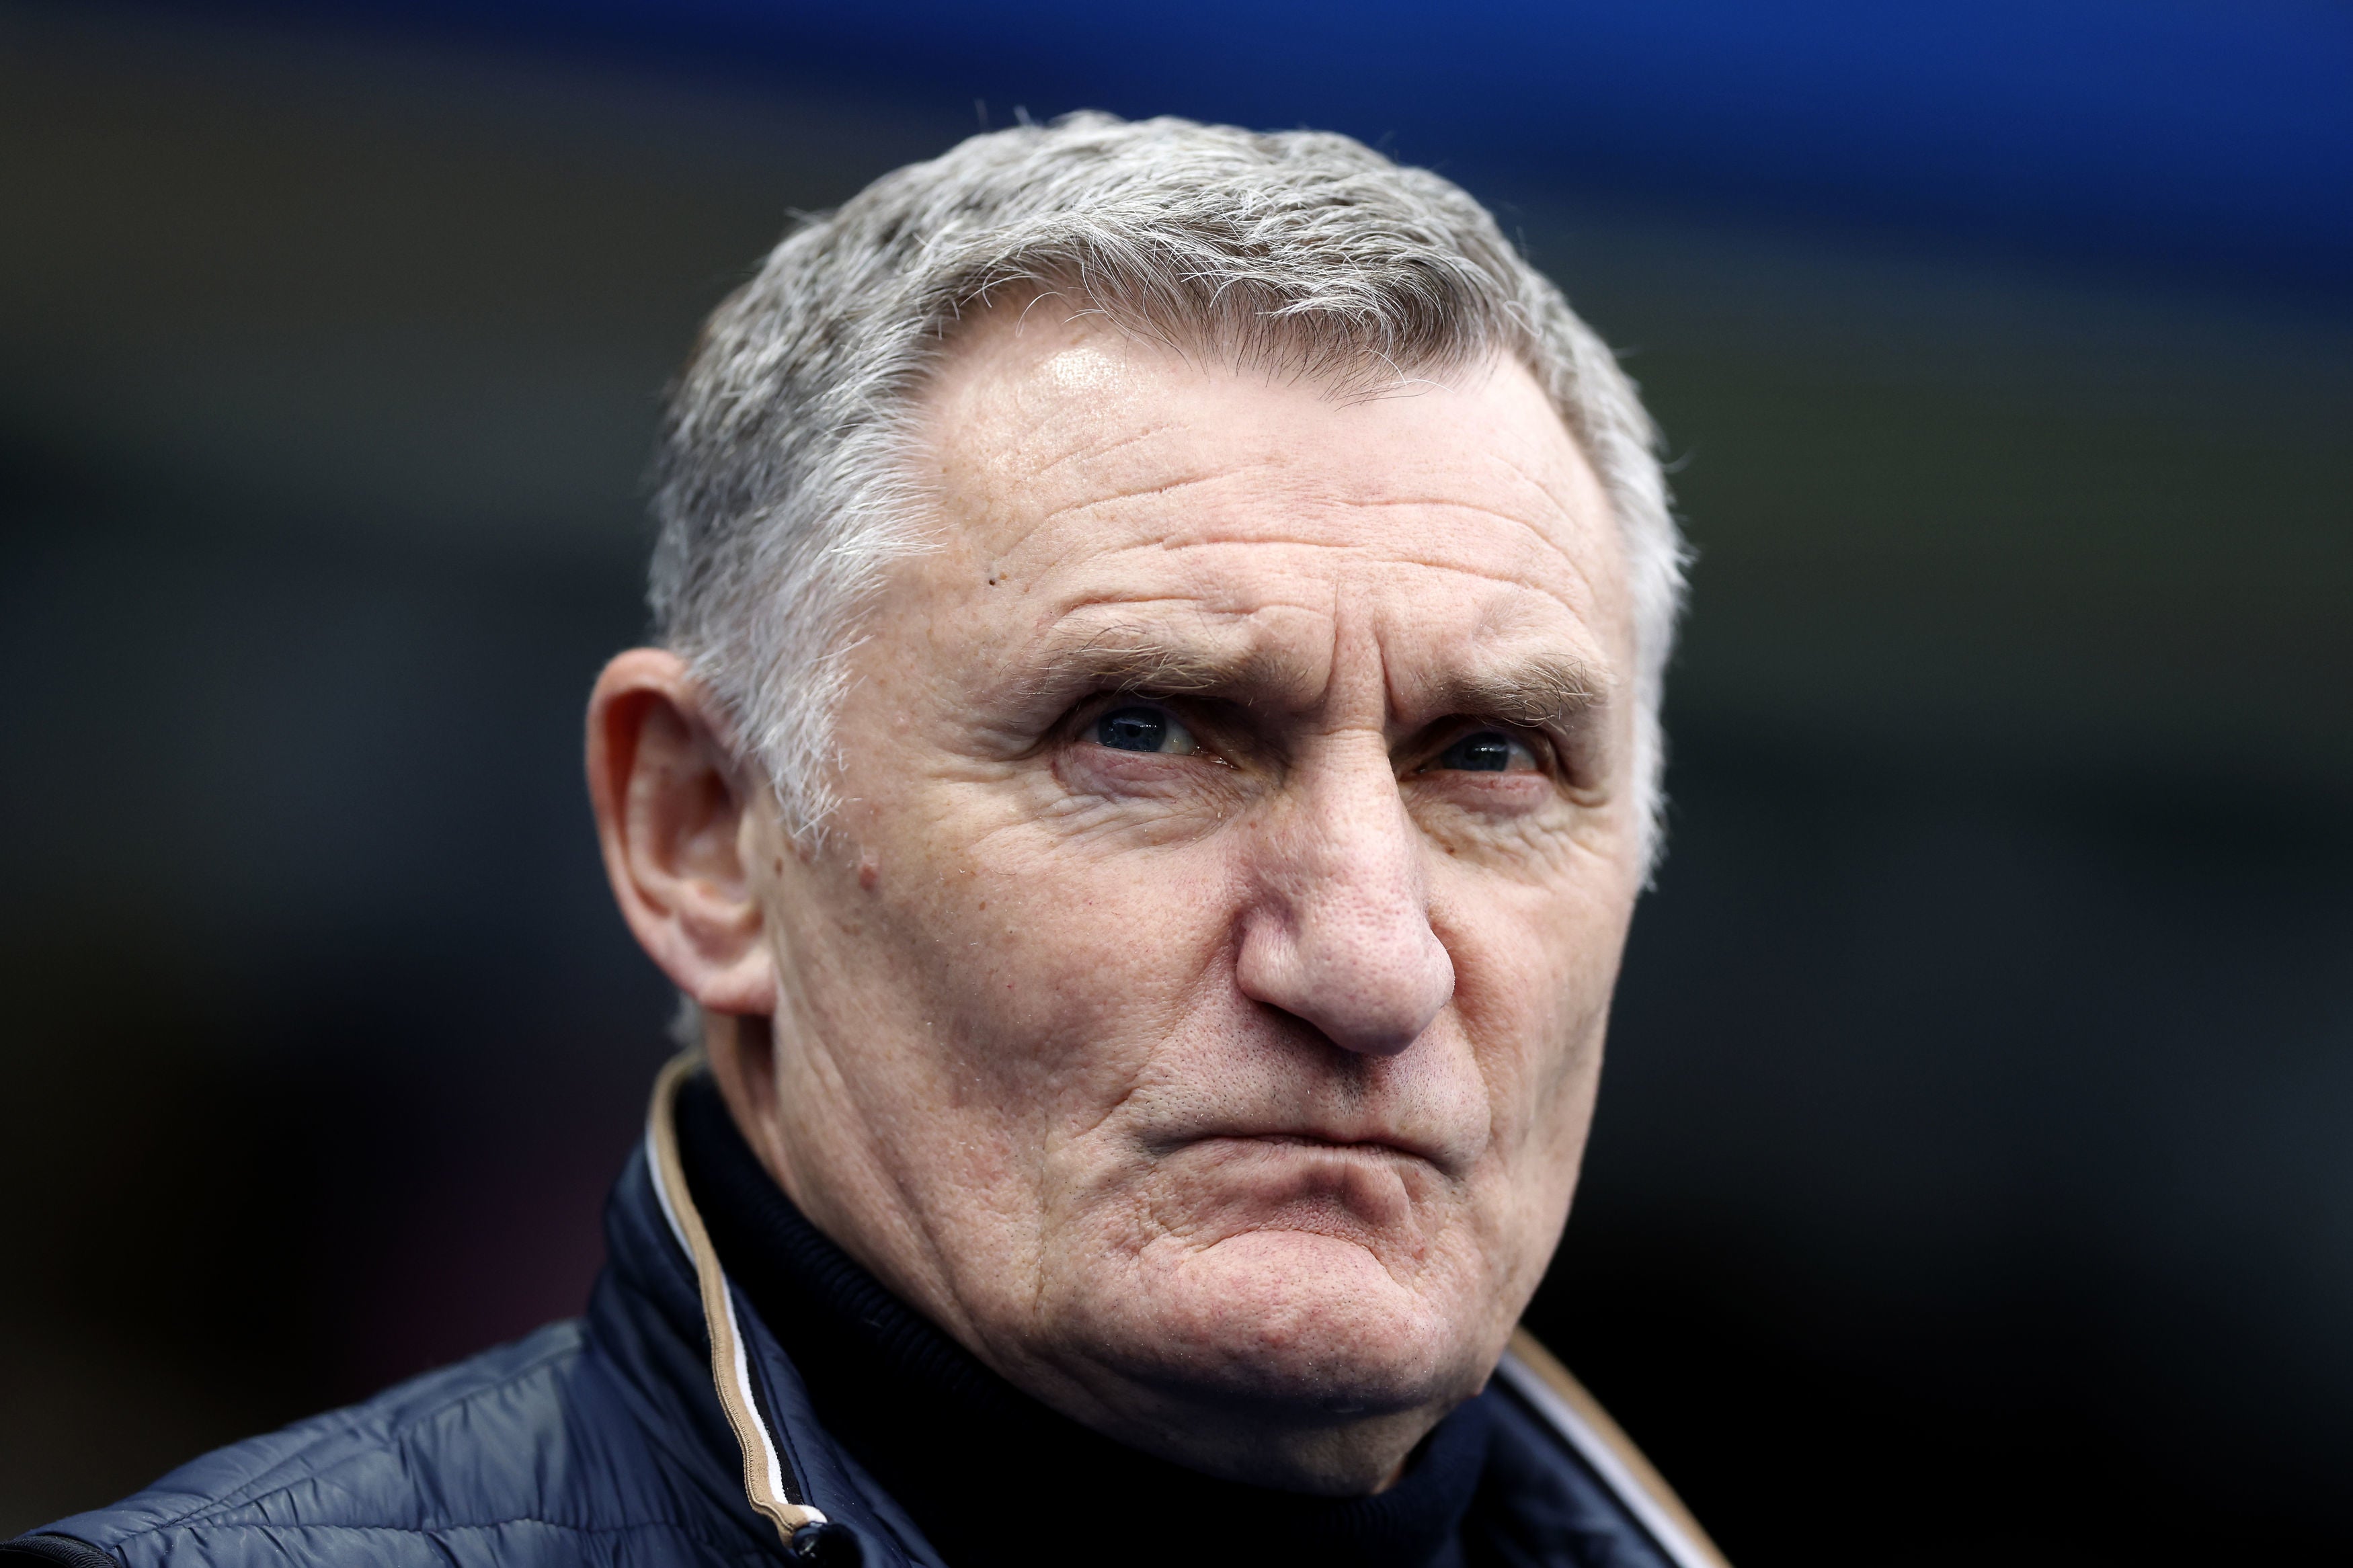 Tony Mowbray will take some time away from the touchline